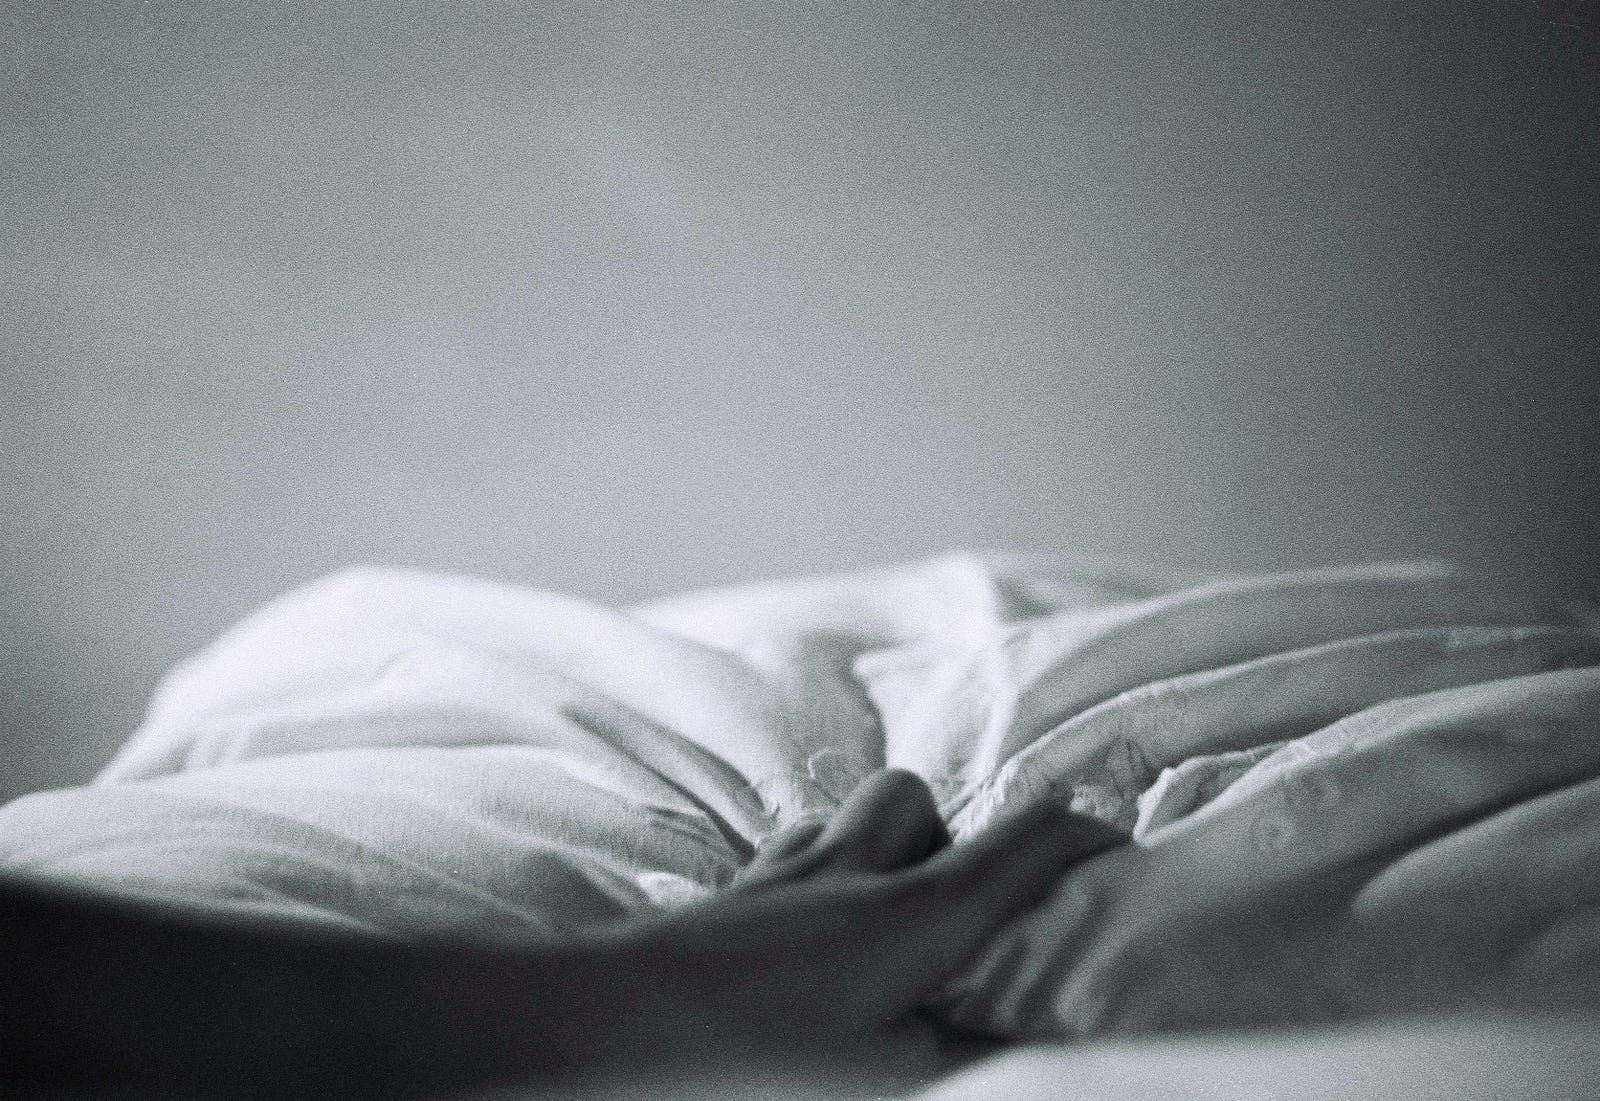 A hand reaches for bedsheets in this black and white image. We only see her arm and hand. Lifestyle factors, such as alcohol consumption and tobacco use, can also affect esophageal health and sleep habits.